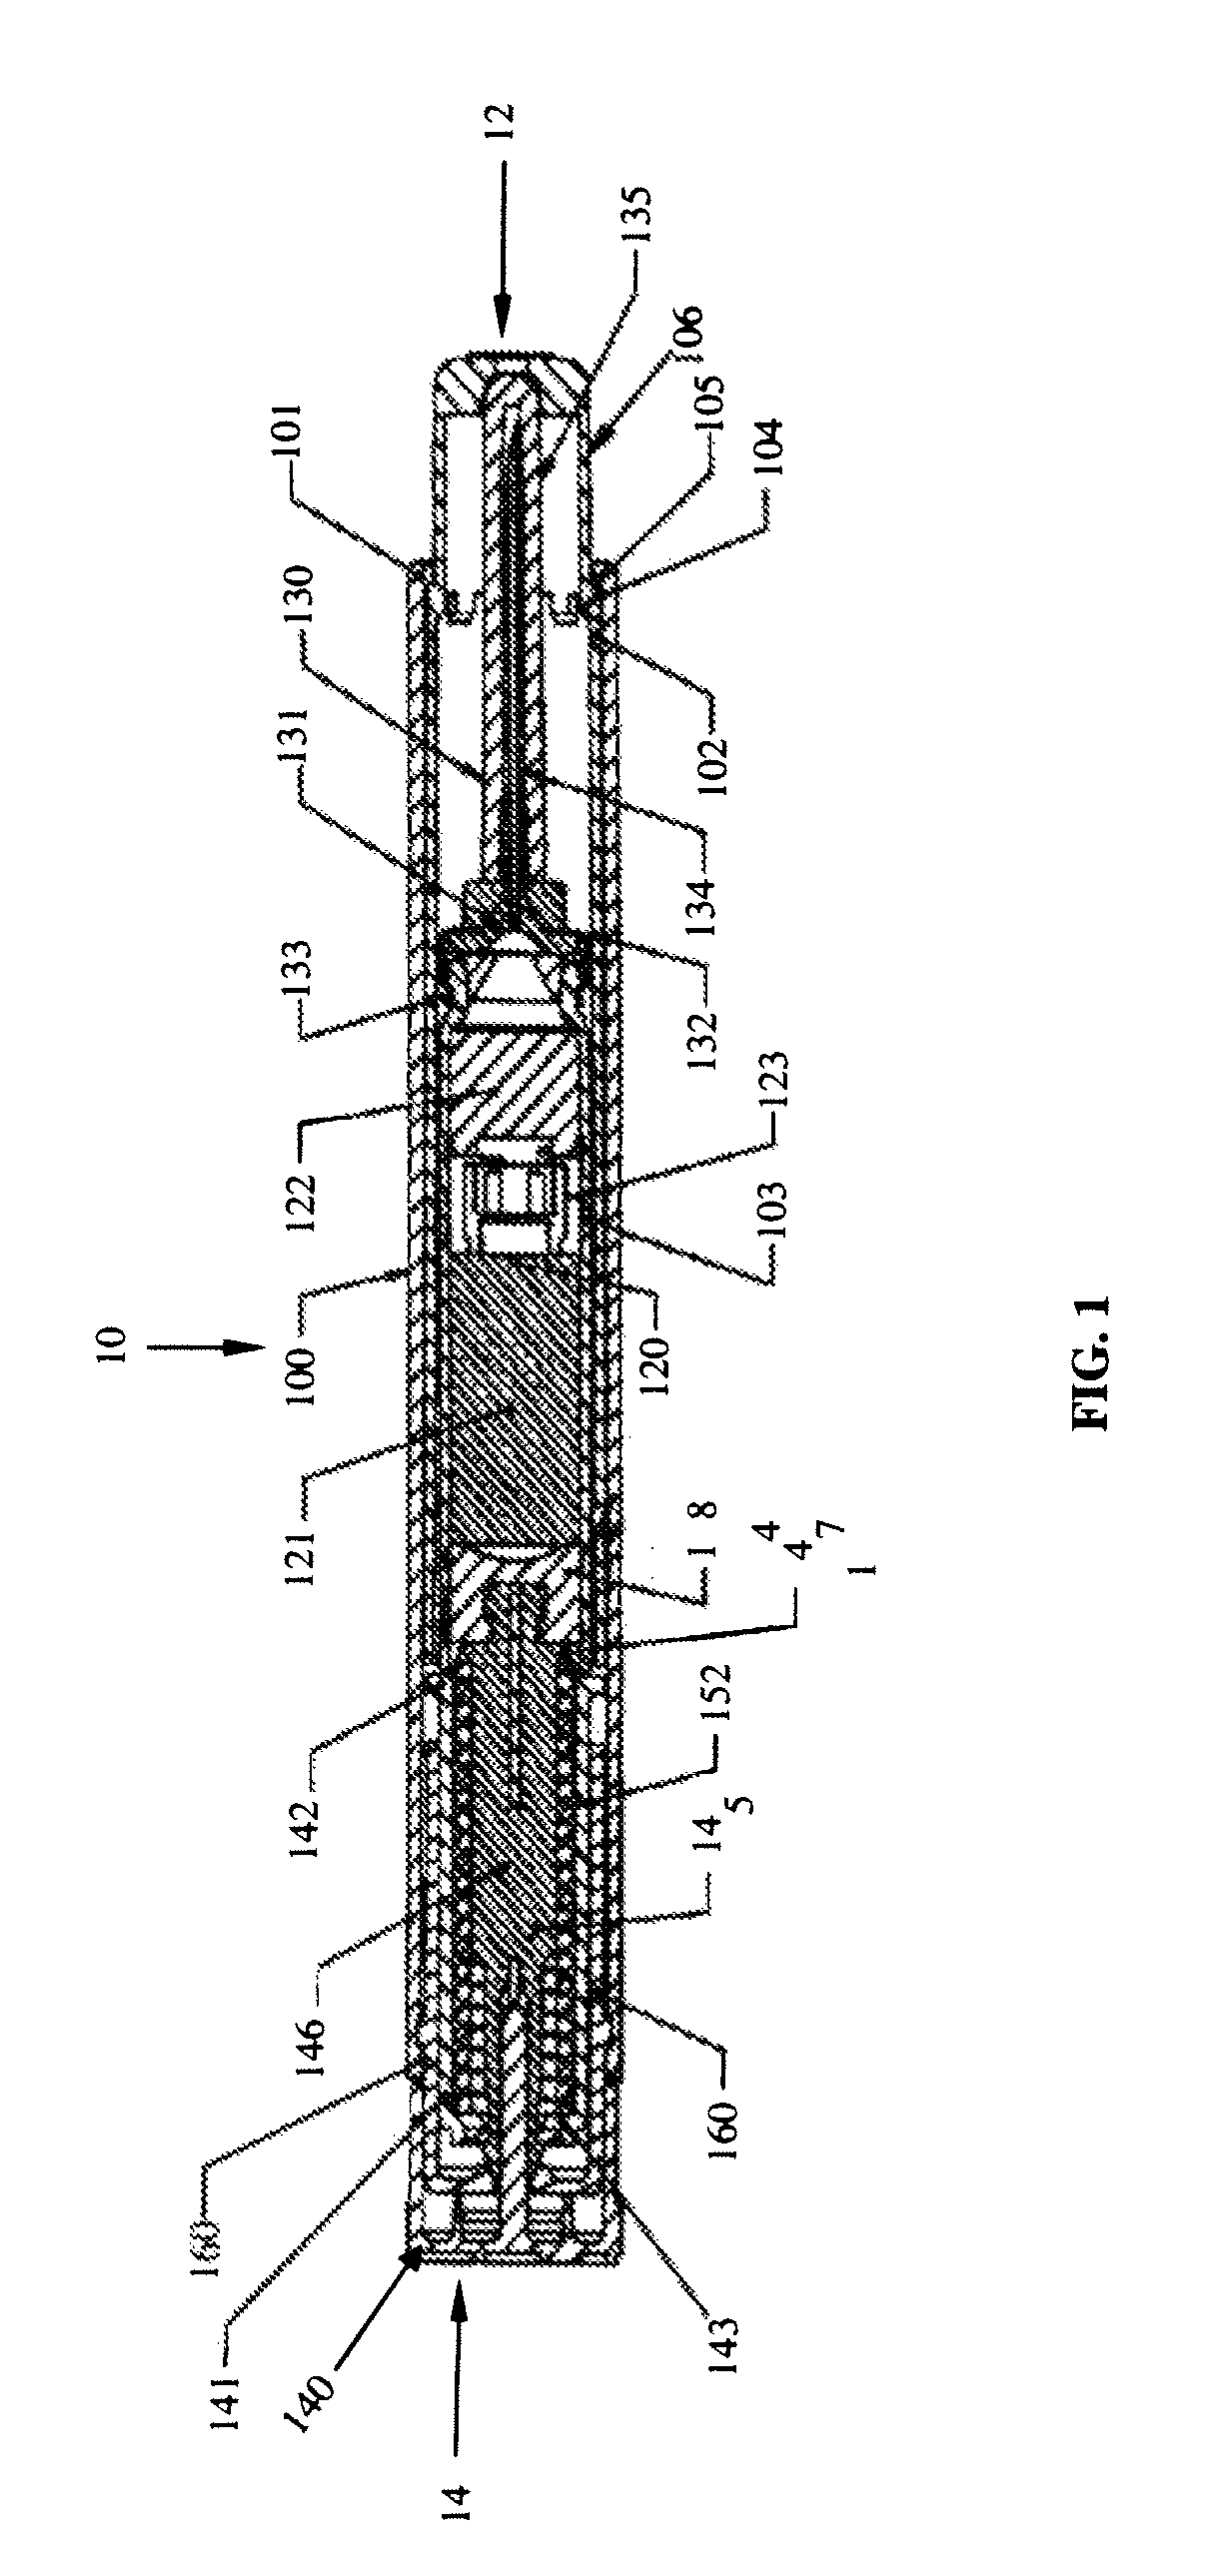 Vortex feature for drug delivery system